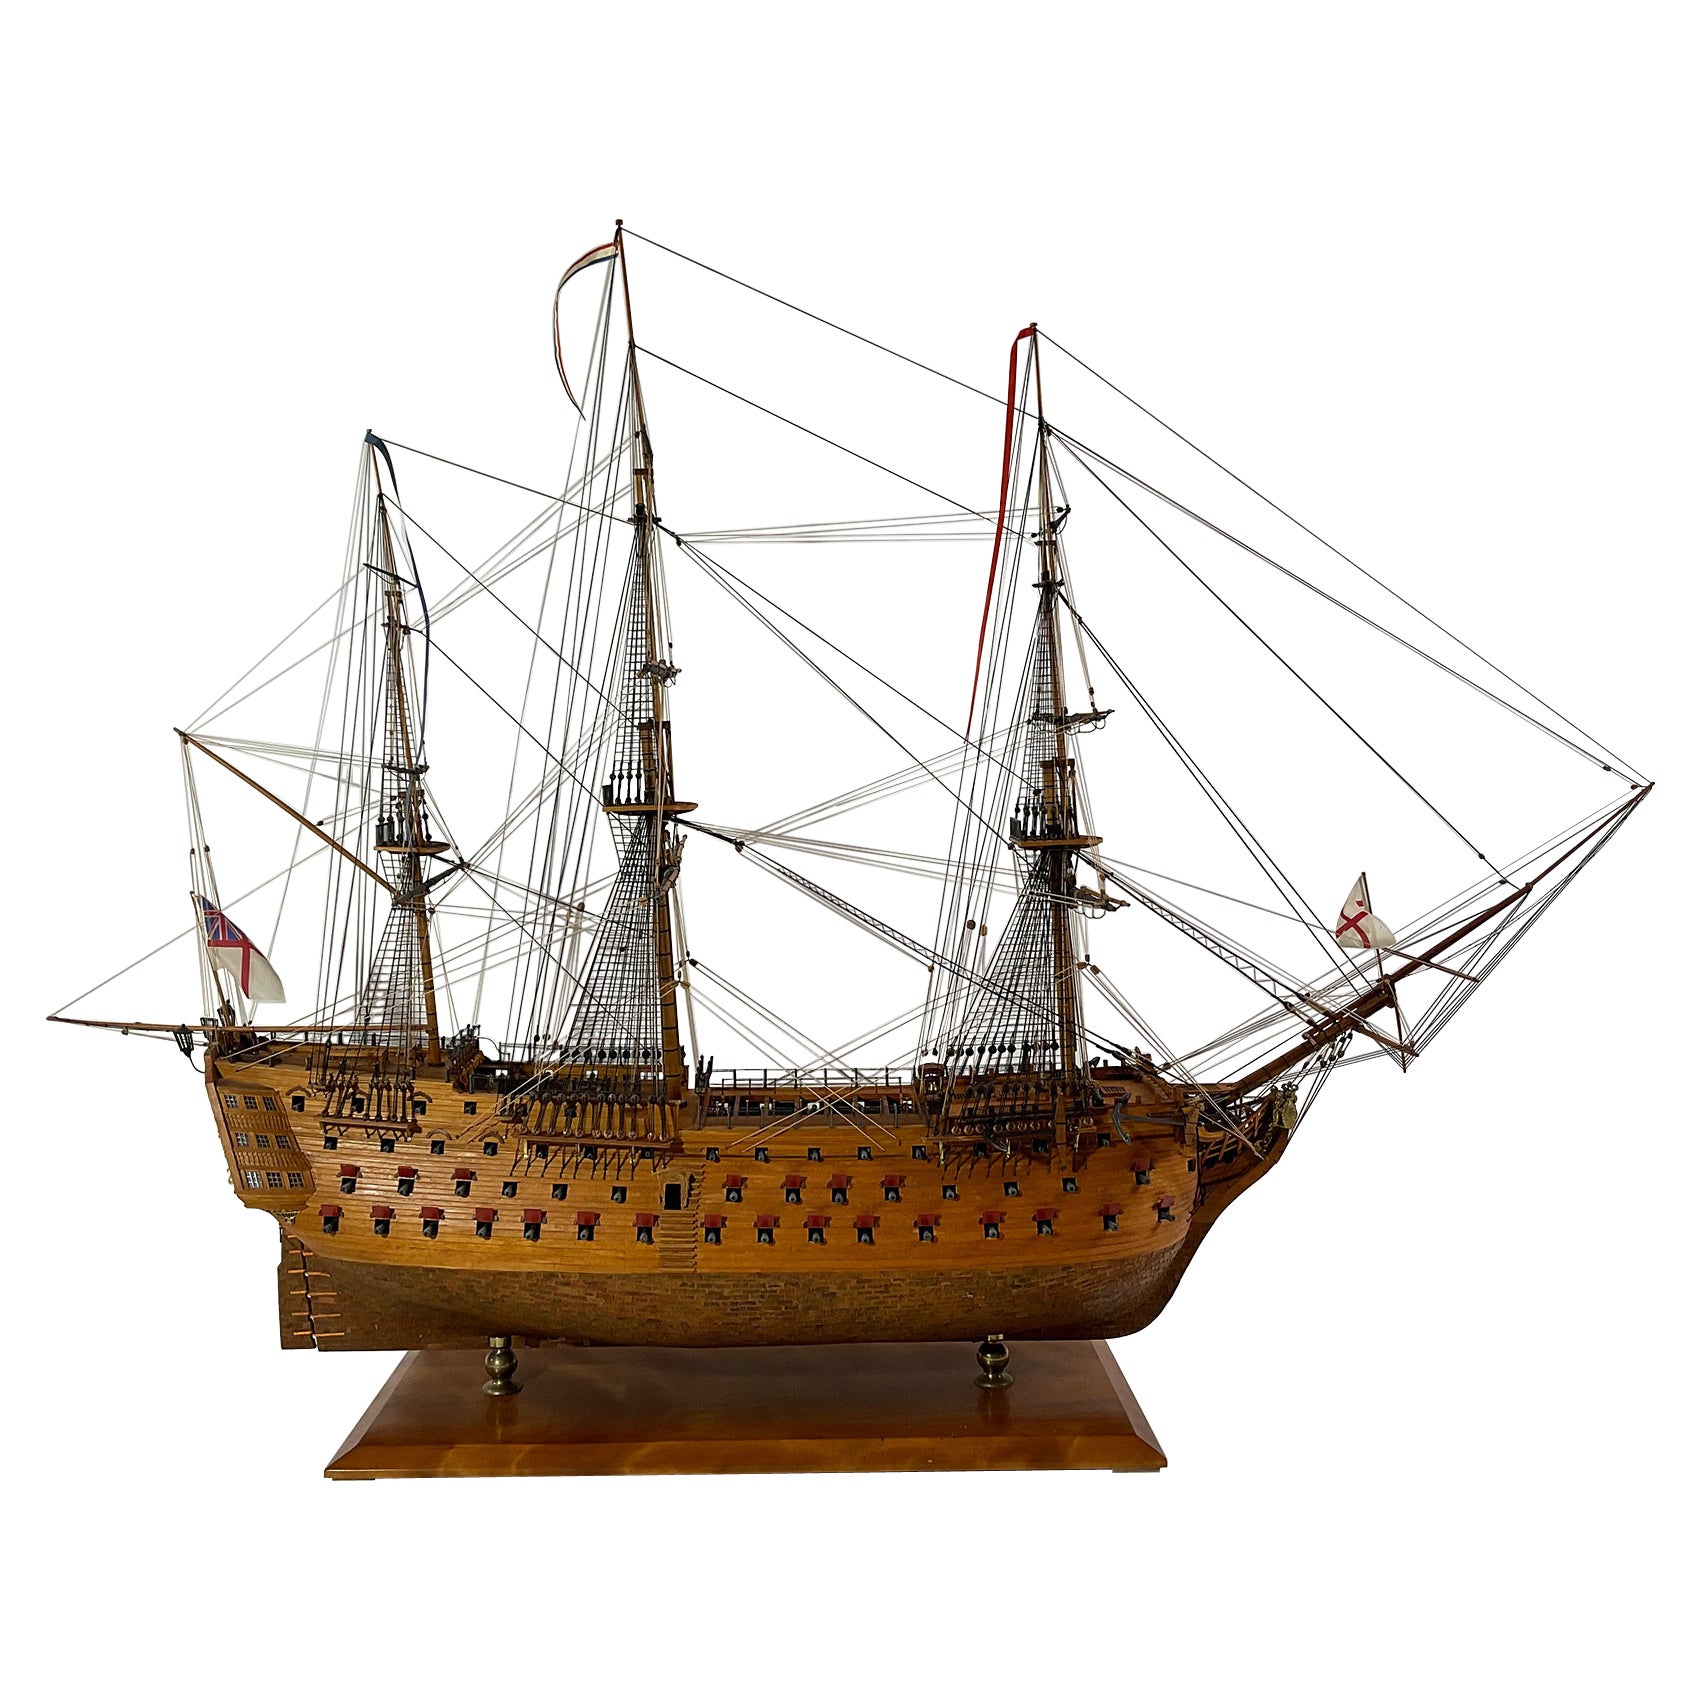 Model of the British Royal Navy Frigate HMS Victory